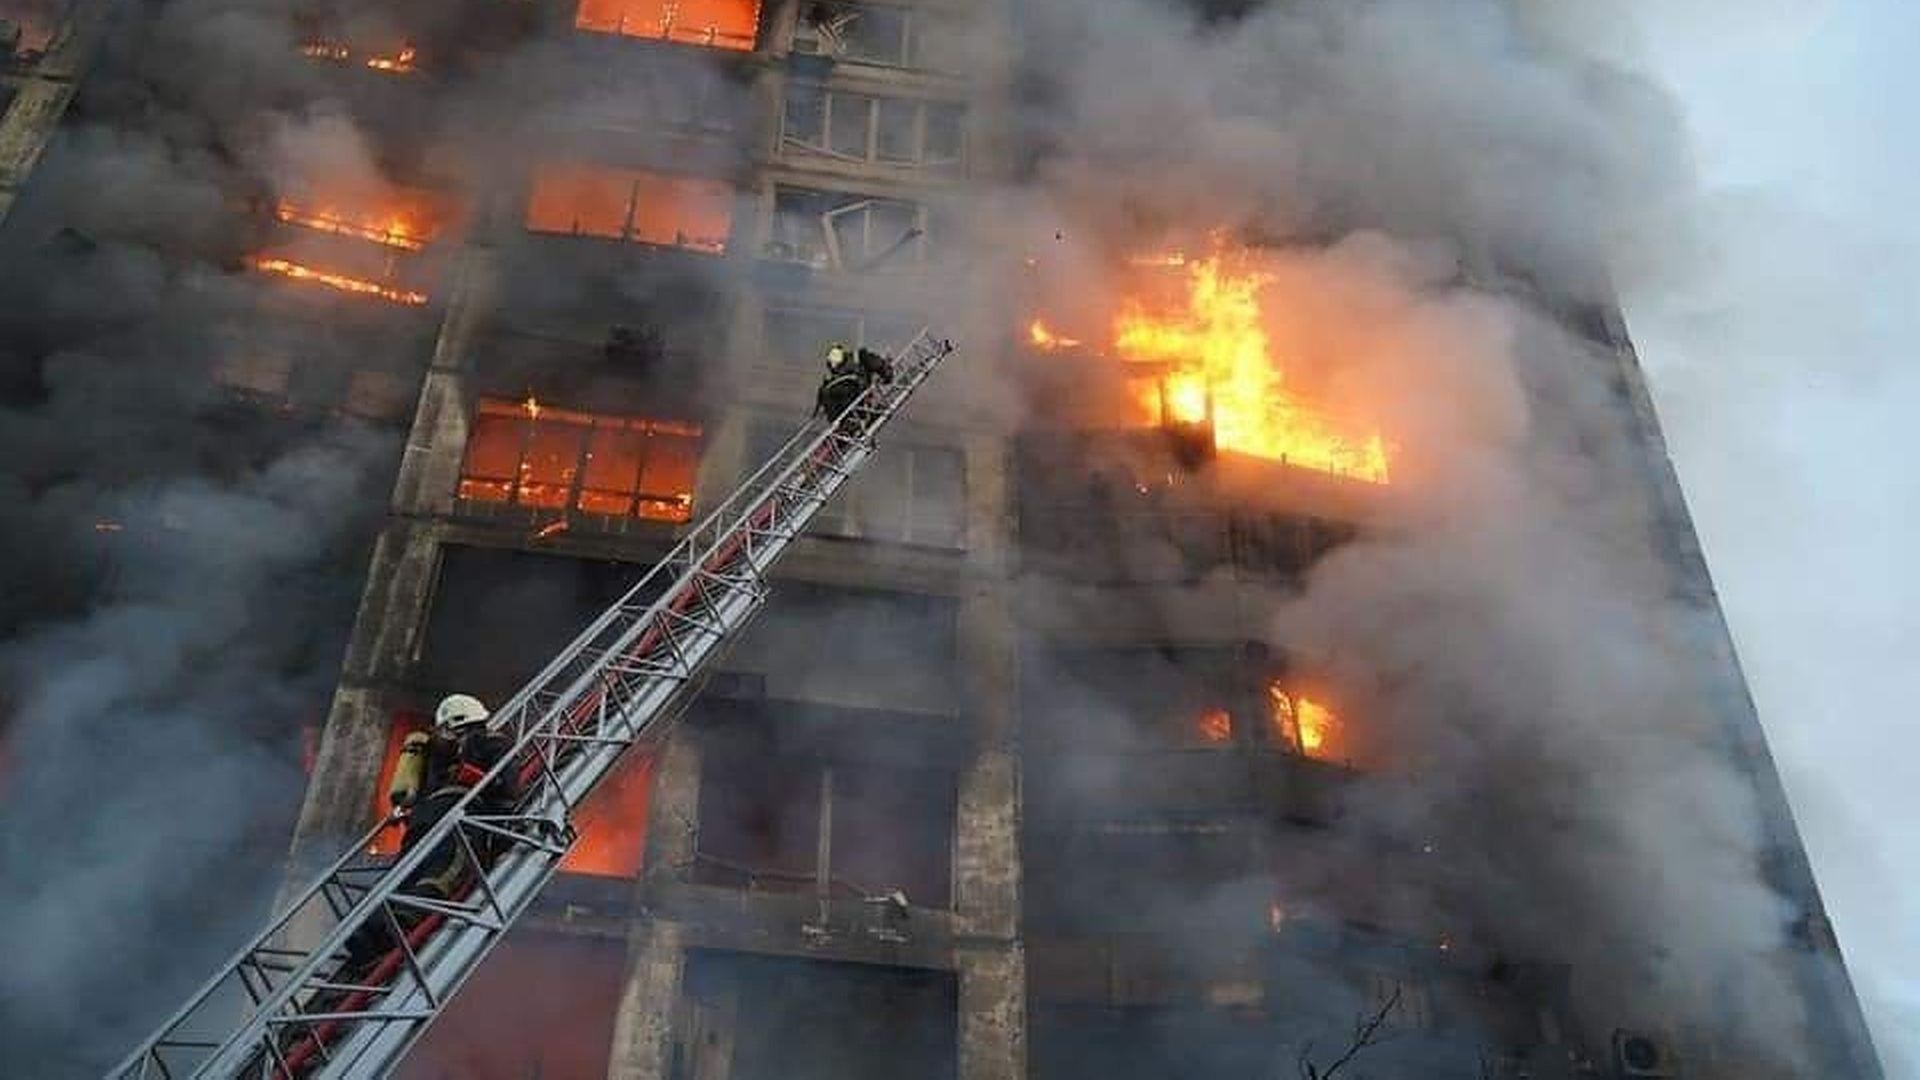 Firefighters try to extinguish a fire after a residential building hit by a Russian attack in Kyiv, Ukraine on March 15.